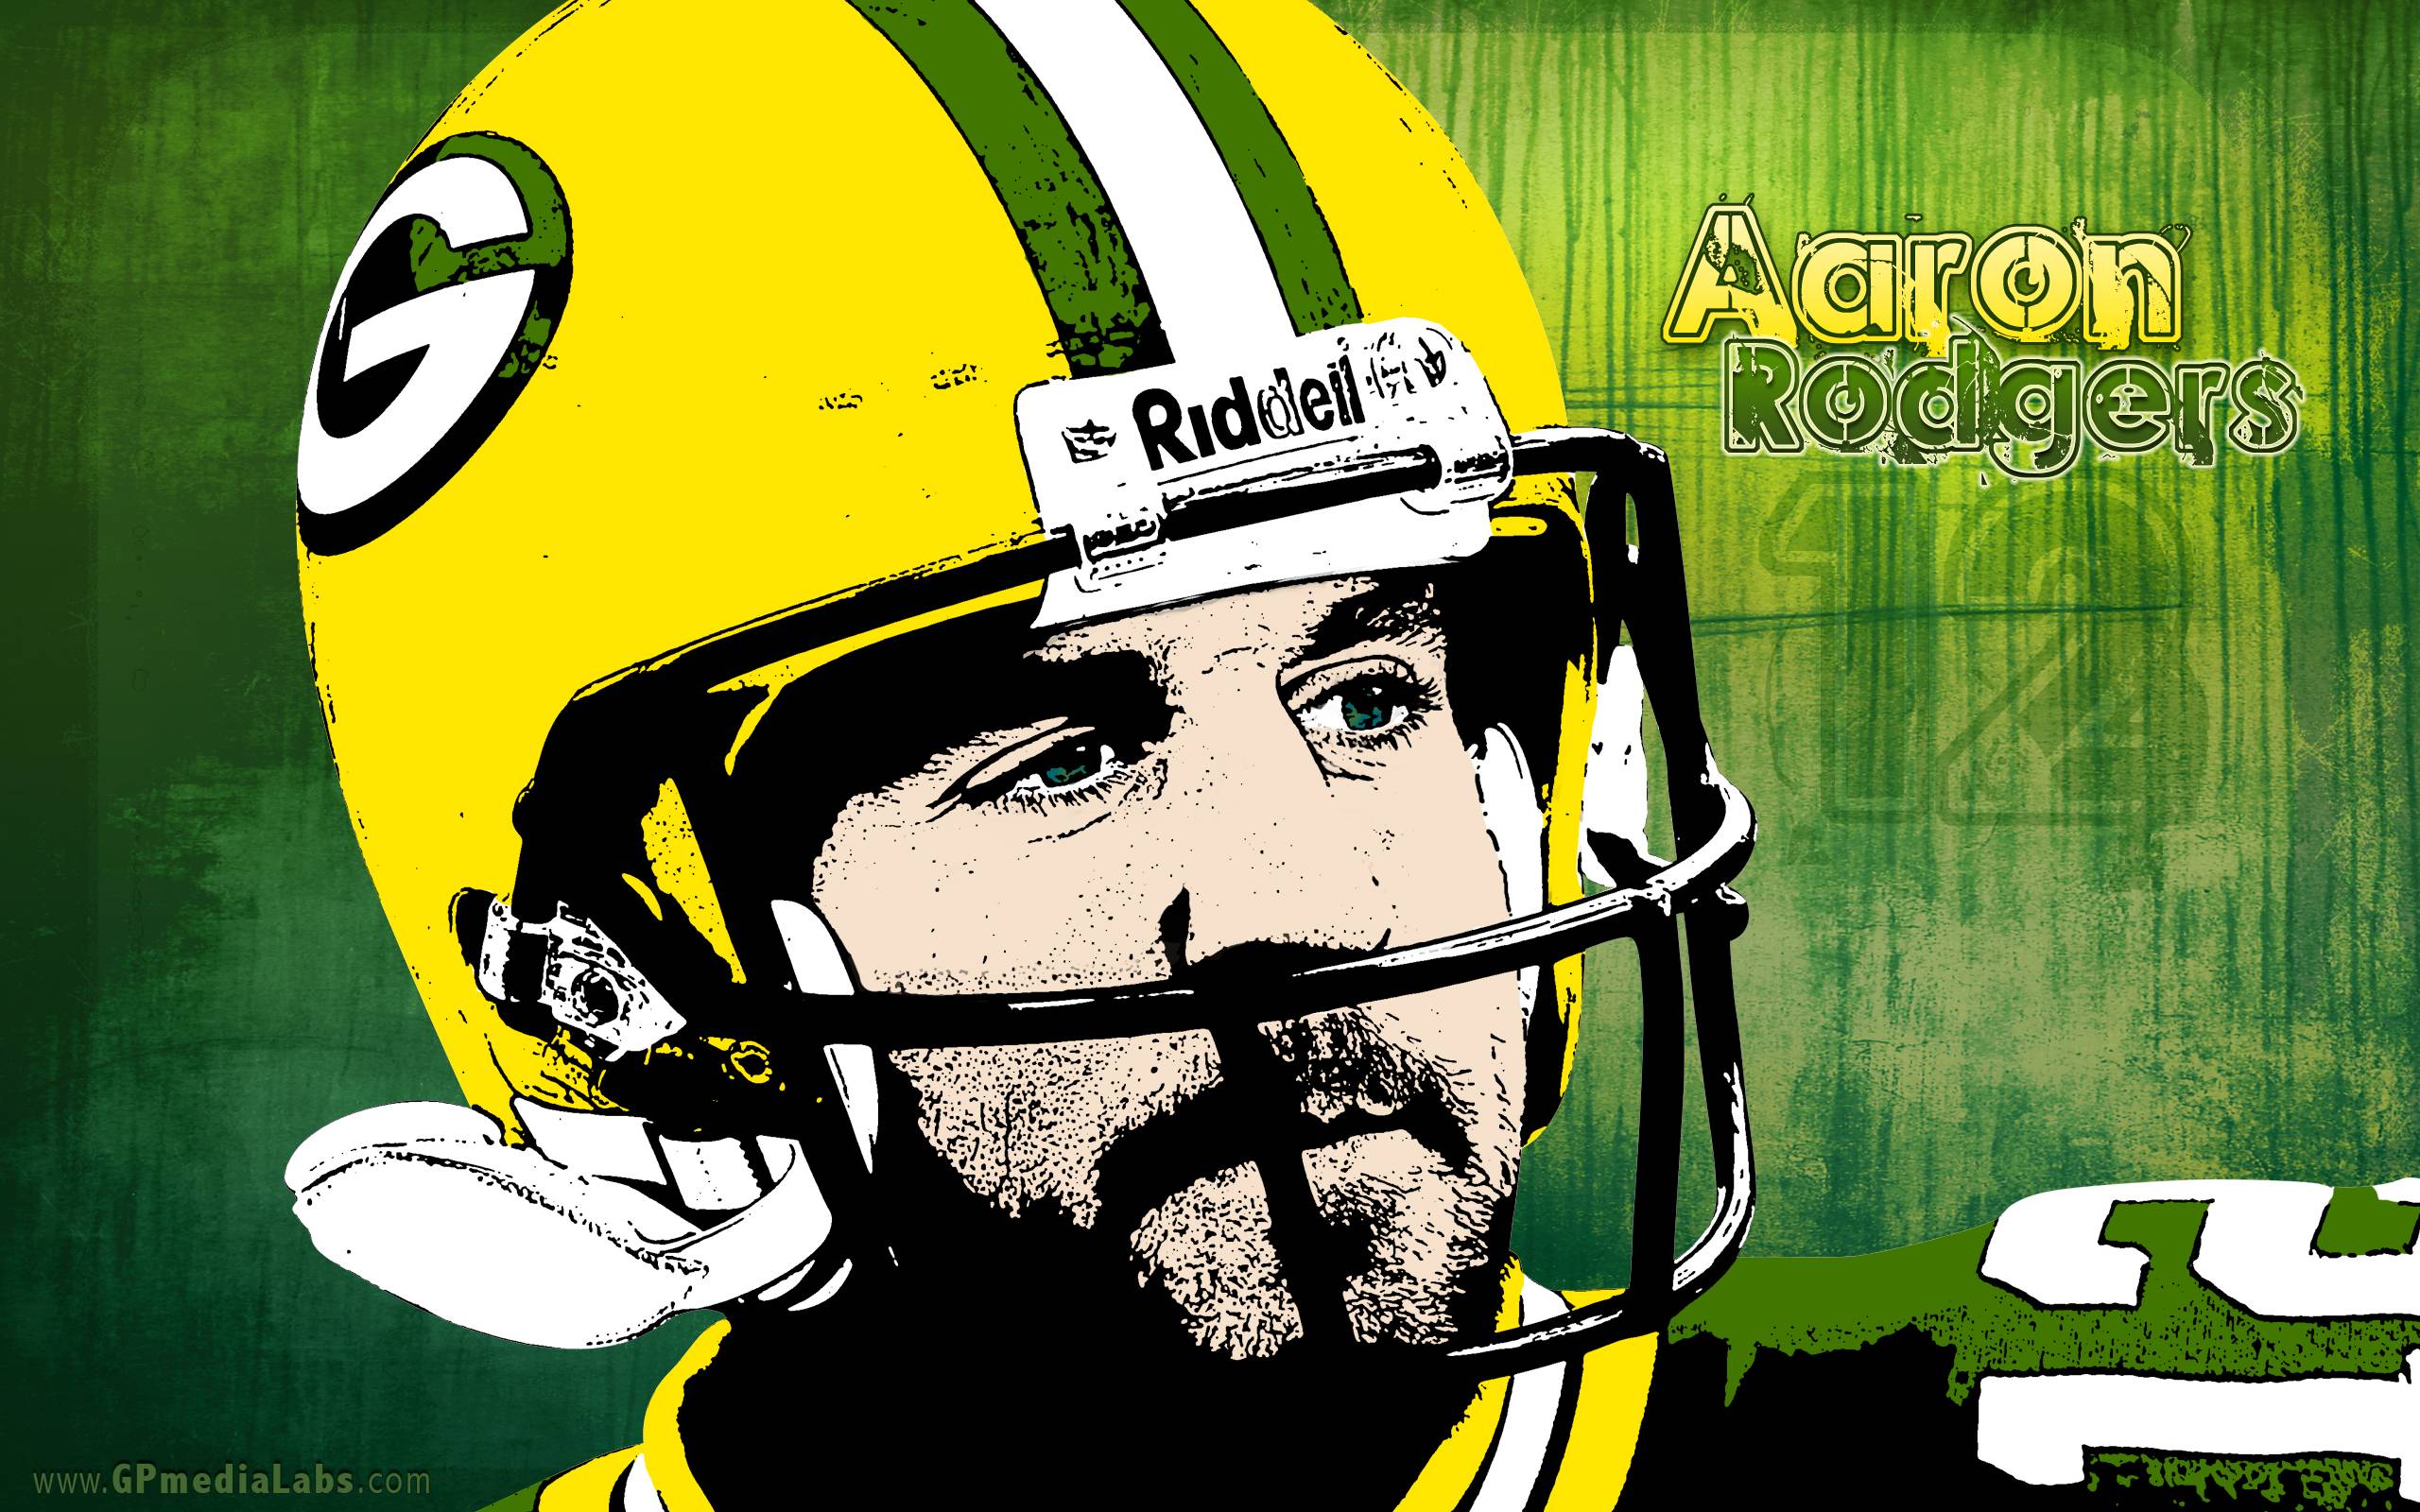 Green Bay Packers HD Wallpaper | Green Bay Packers Wallpapers ...